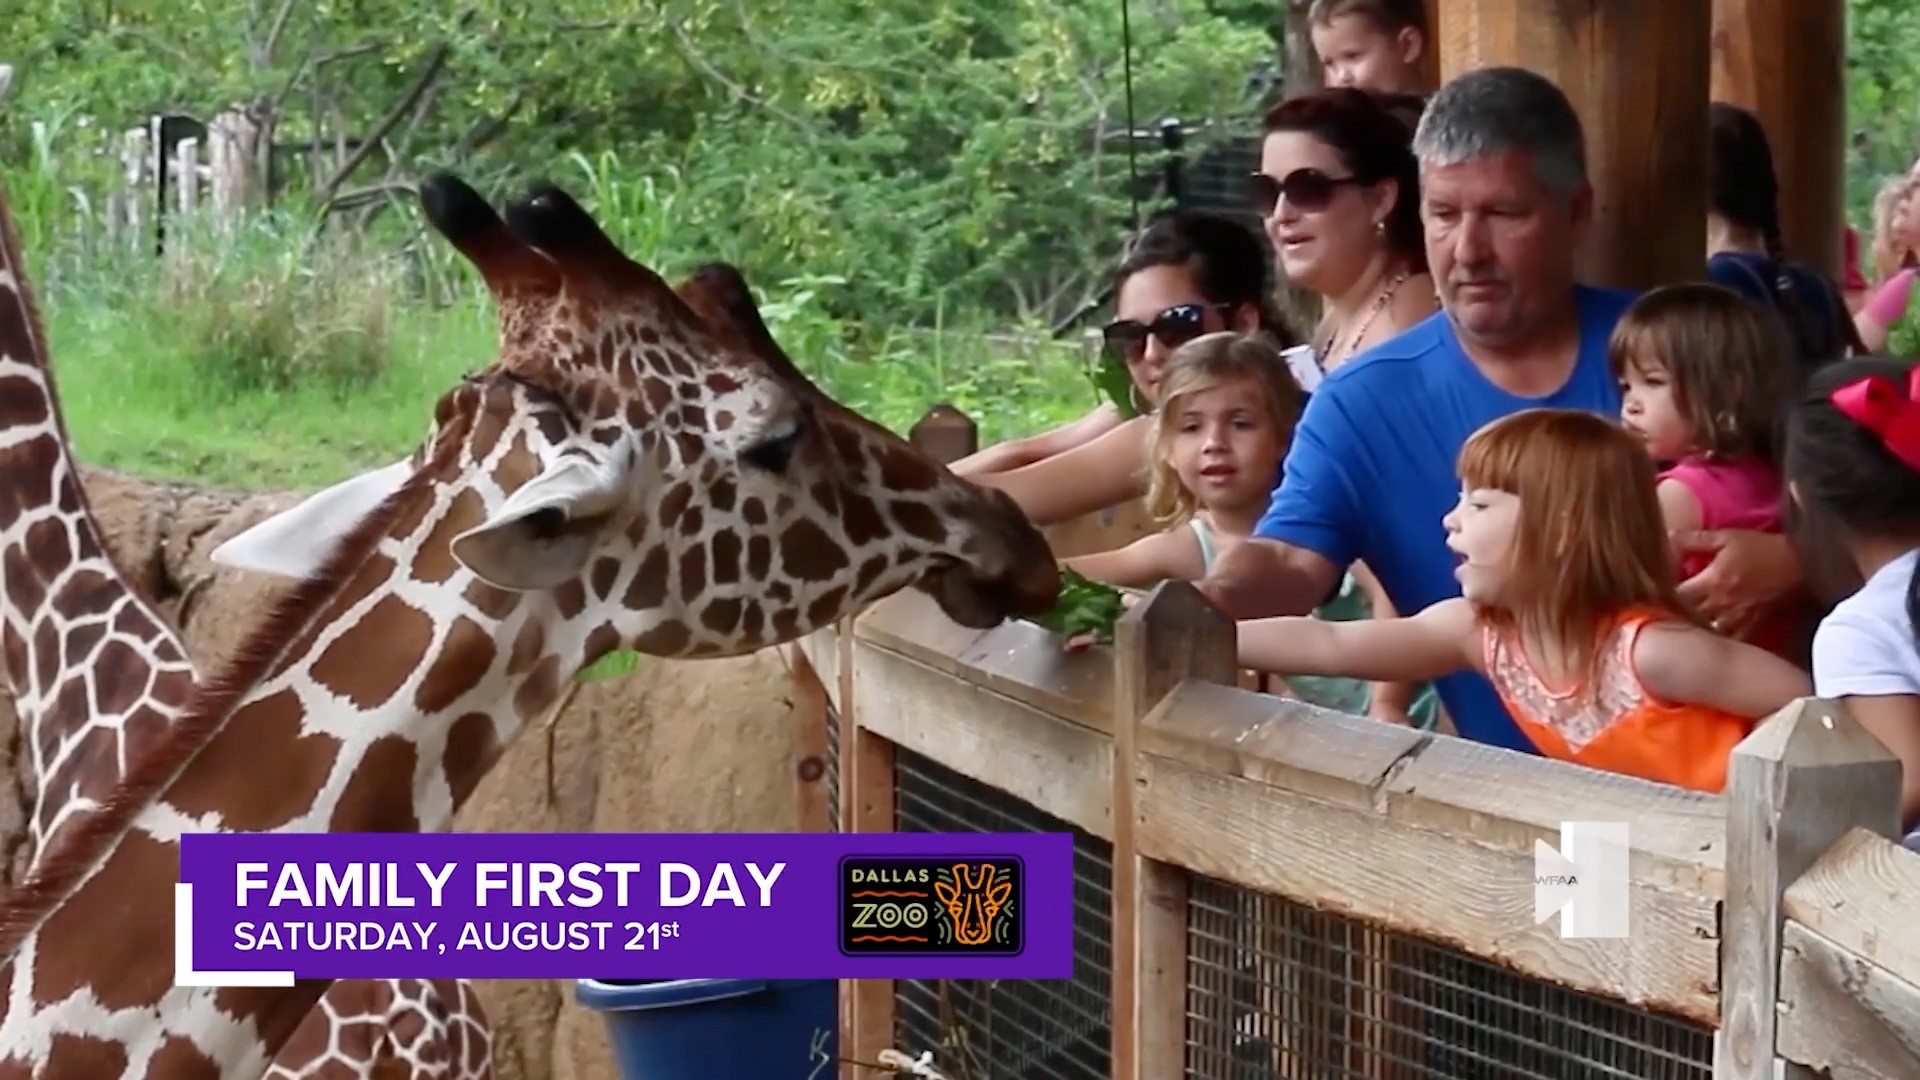 SPECIAL DISCOUNT DAY AUGUST 21st – It’s WFAA Family First day at the Dallas Zoo.